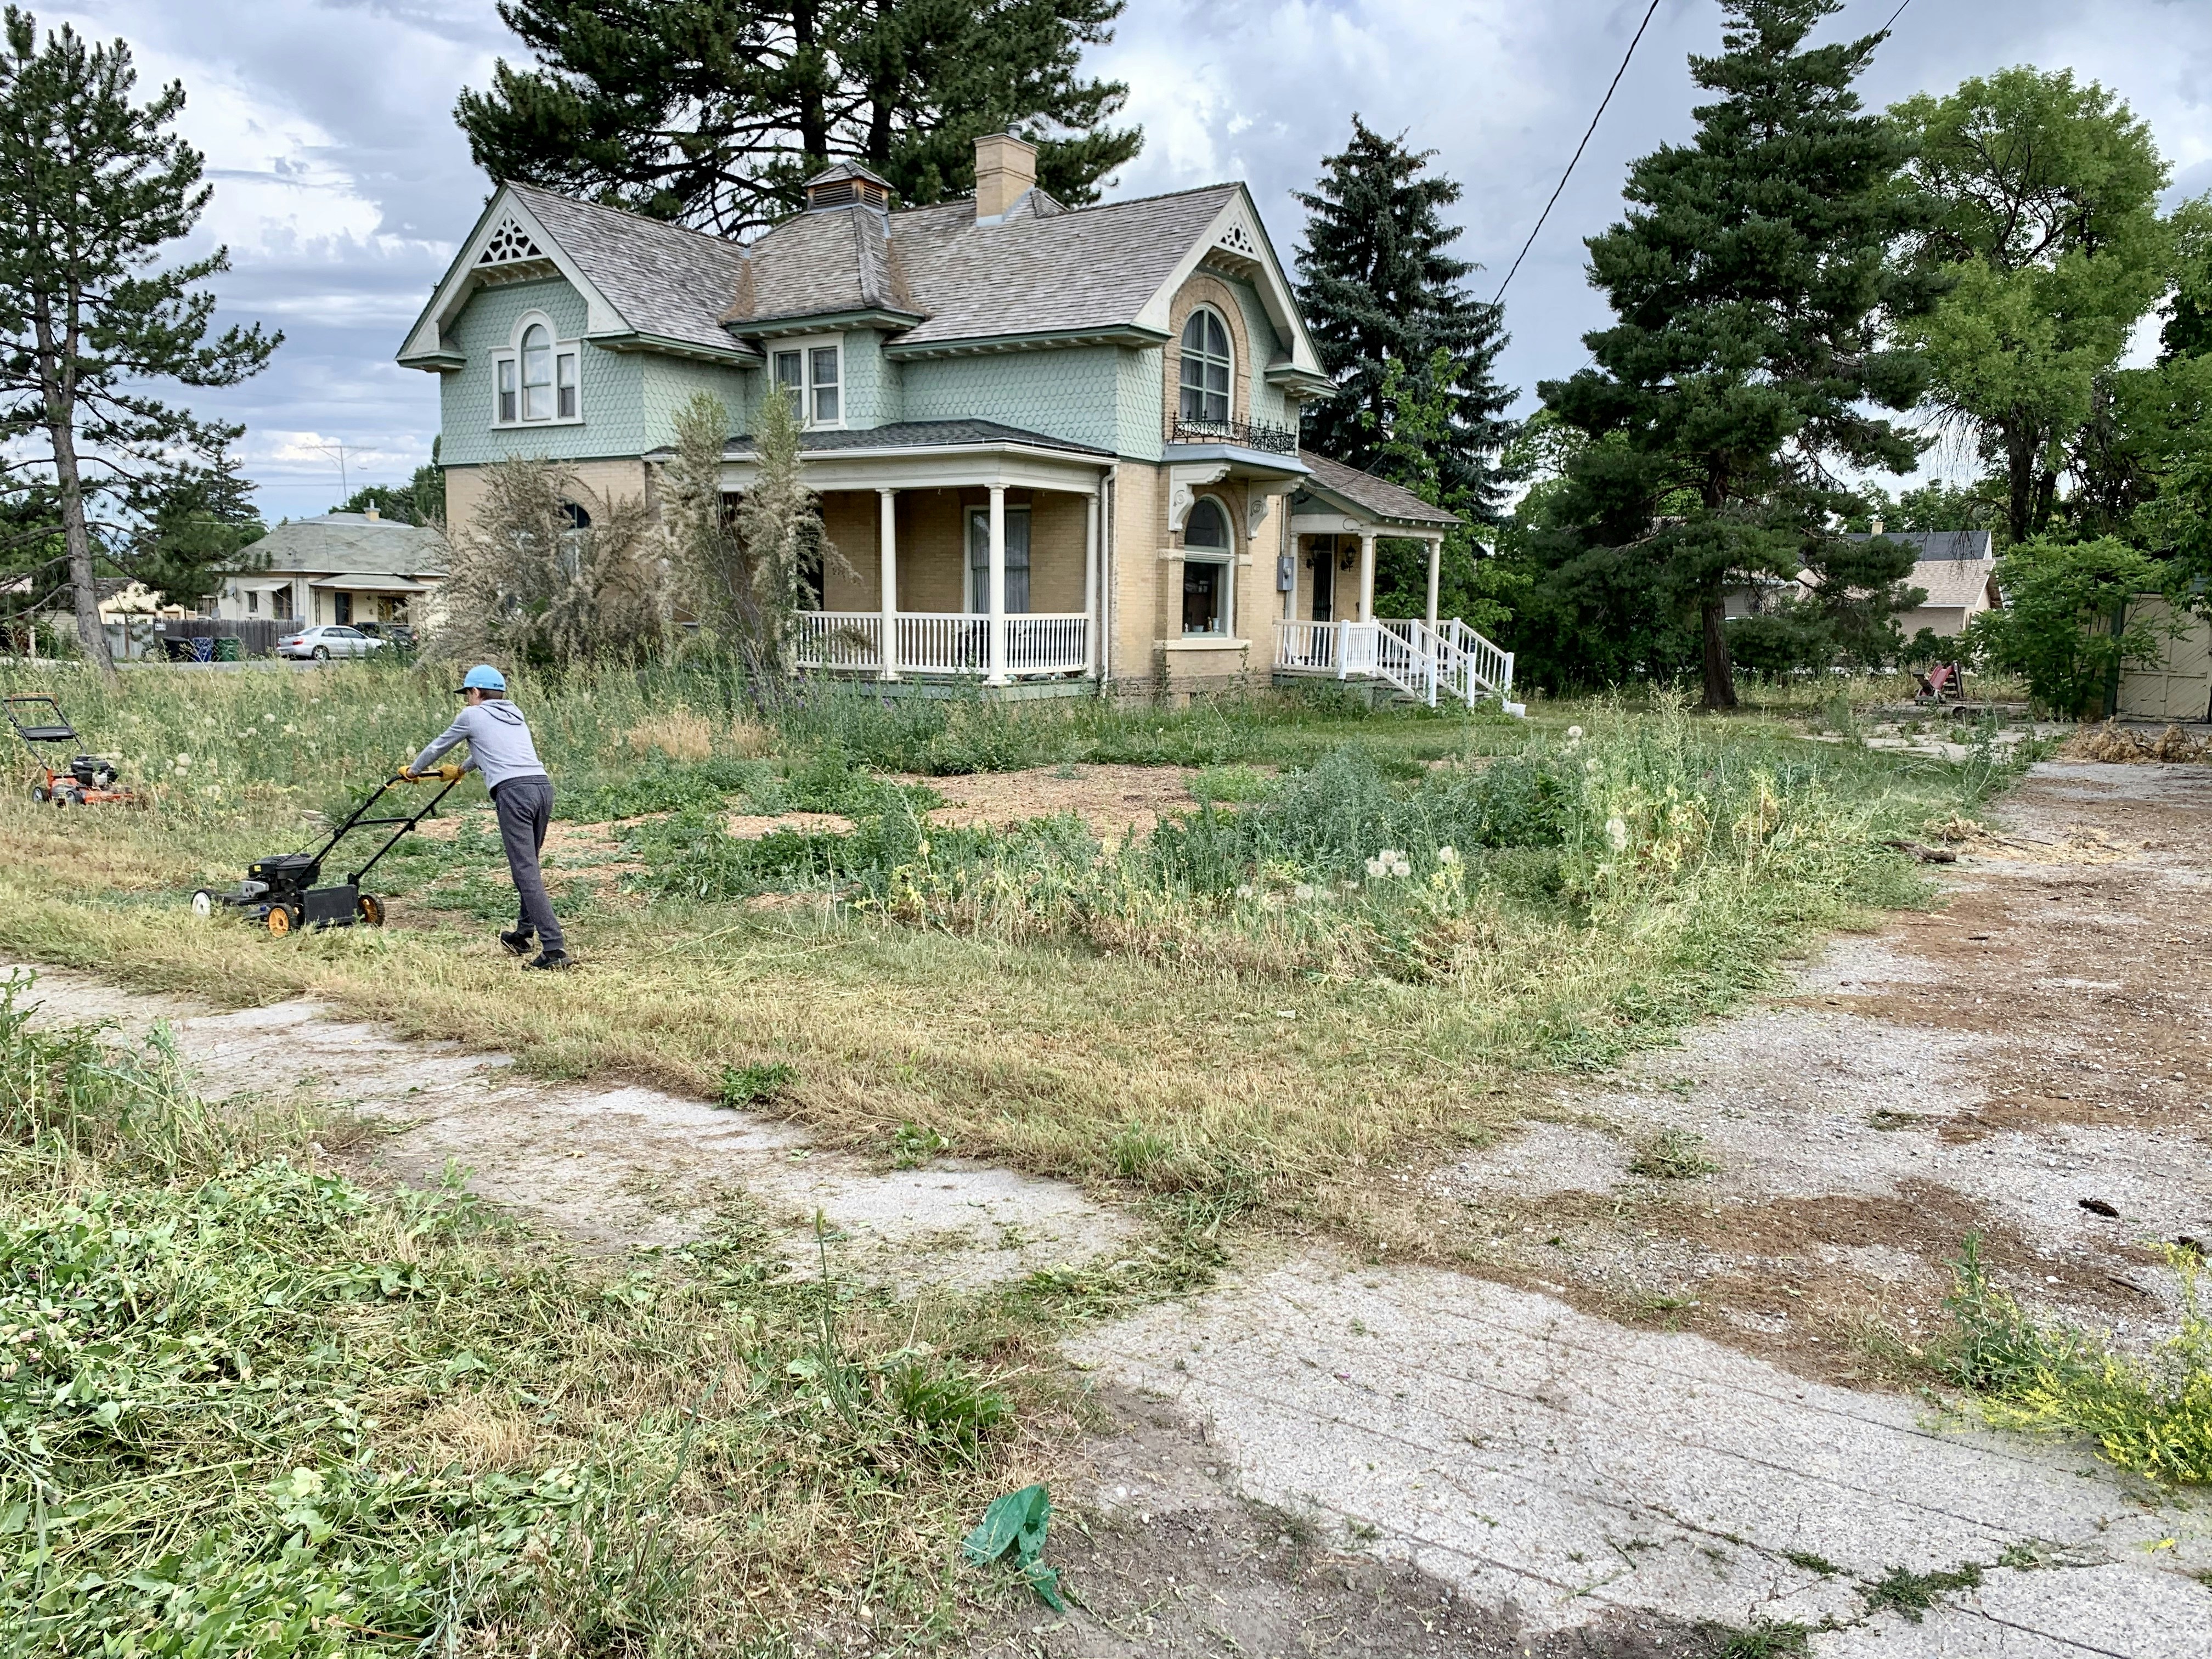 Mowing the lawn and weeds of an old historic home in Smithfield Utah. Located at TK Secure Storage in Logan & Brigham City, Utah. www.tksecurestoragelogan.com www.tksecurestoragebc.com